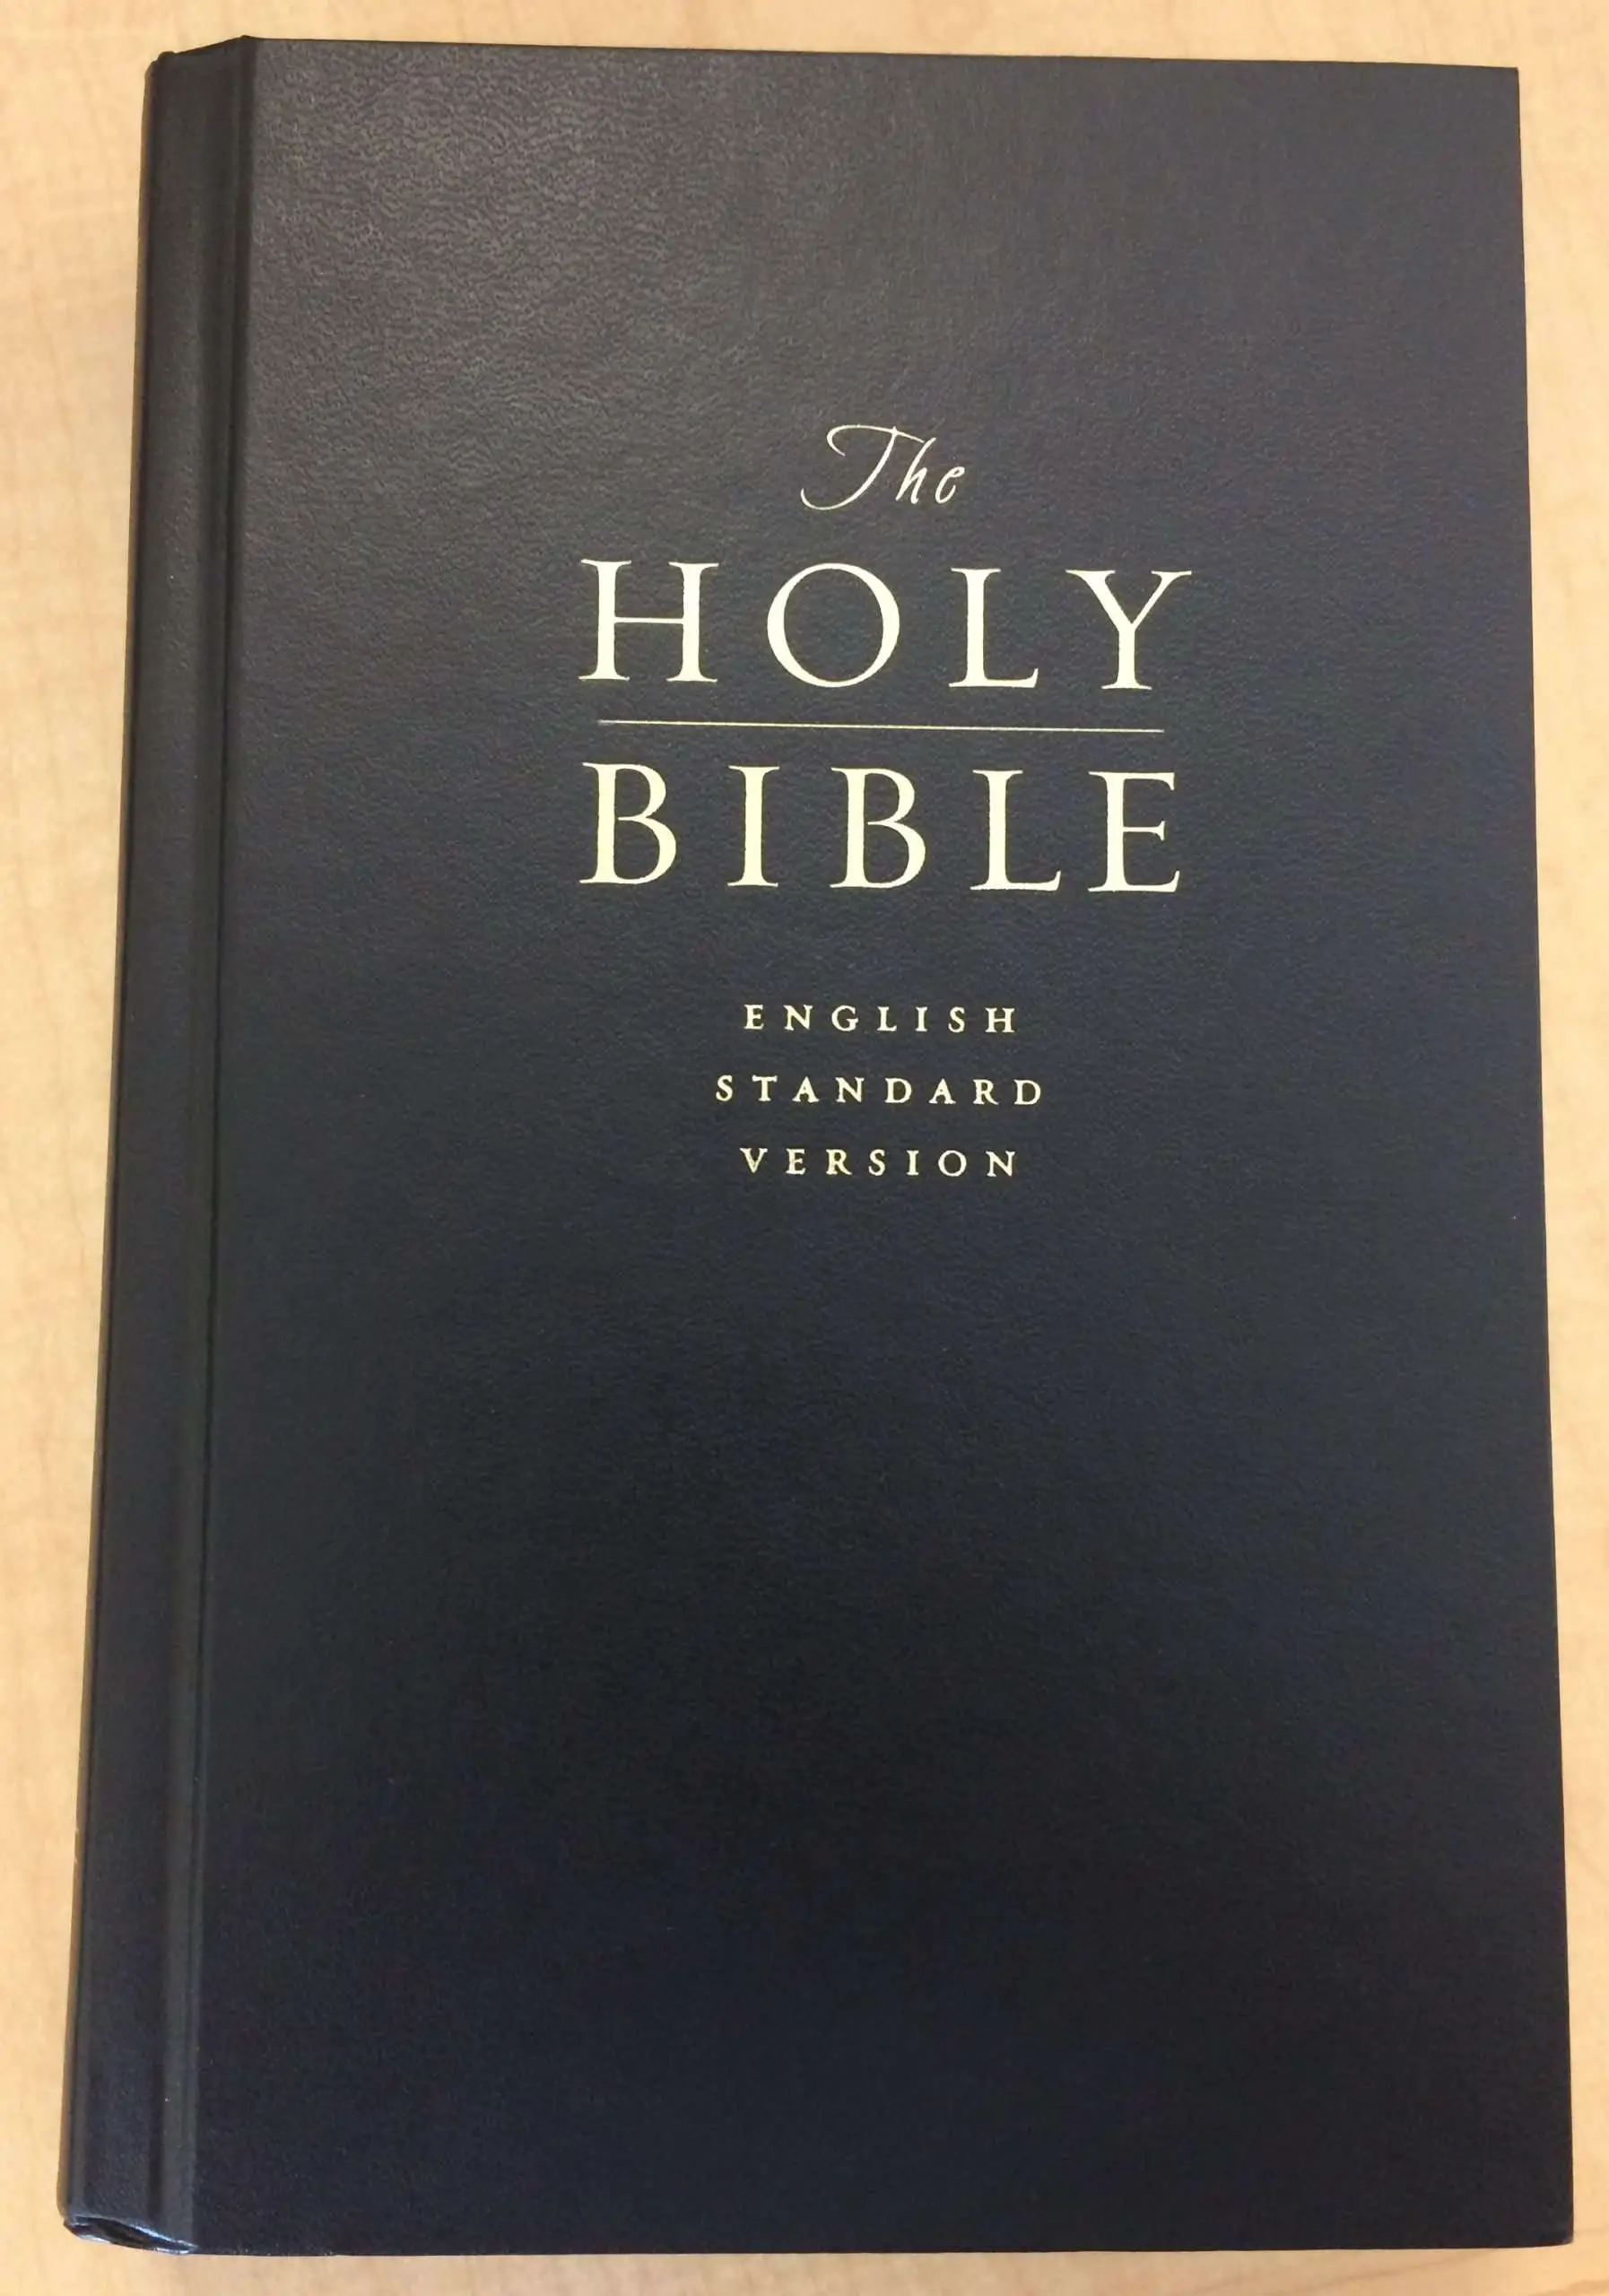 which bible is the easiest to understand